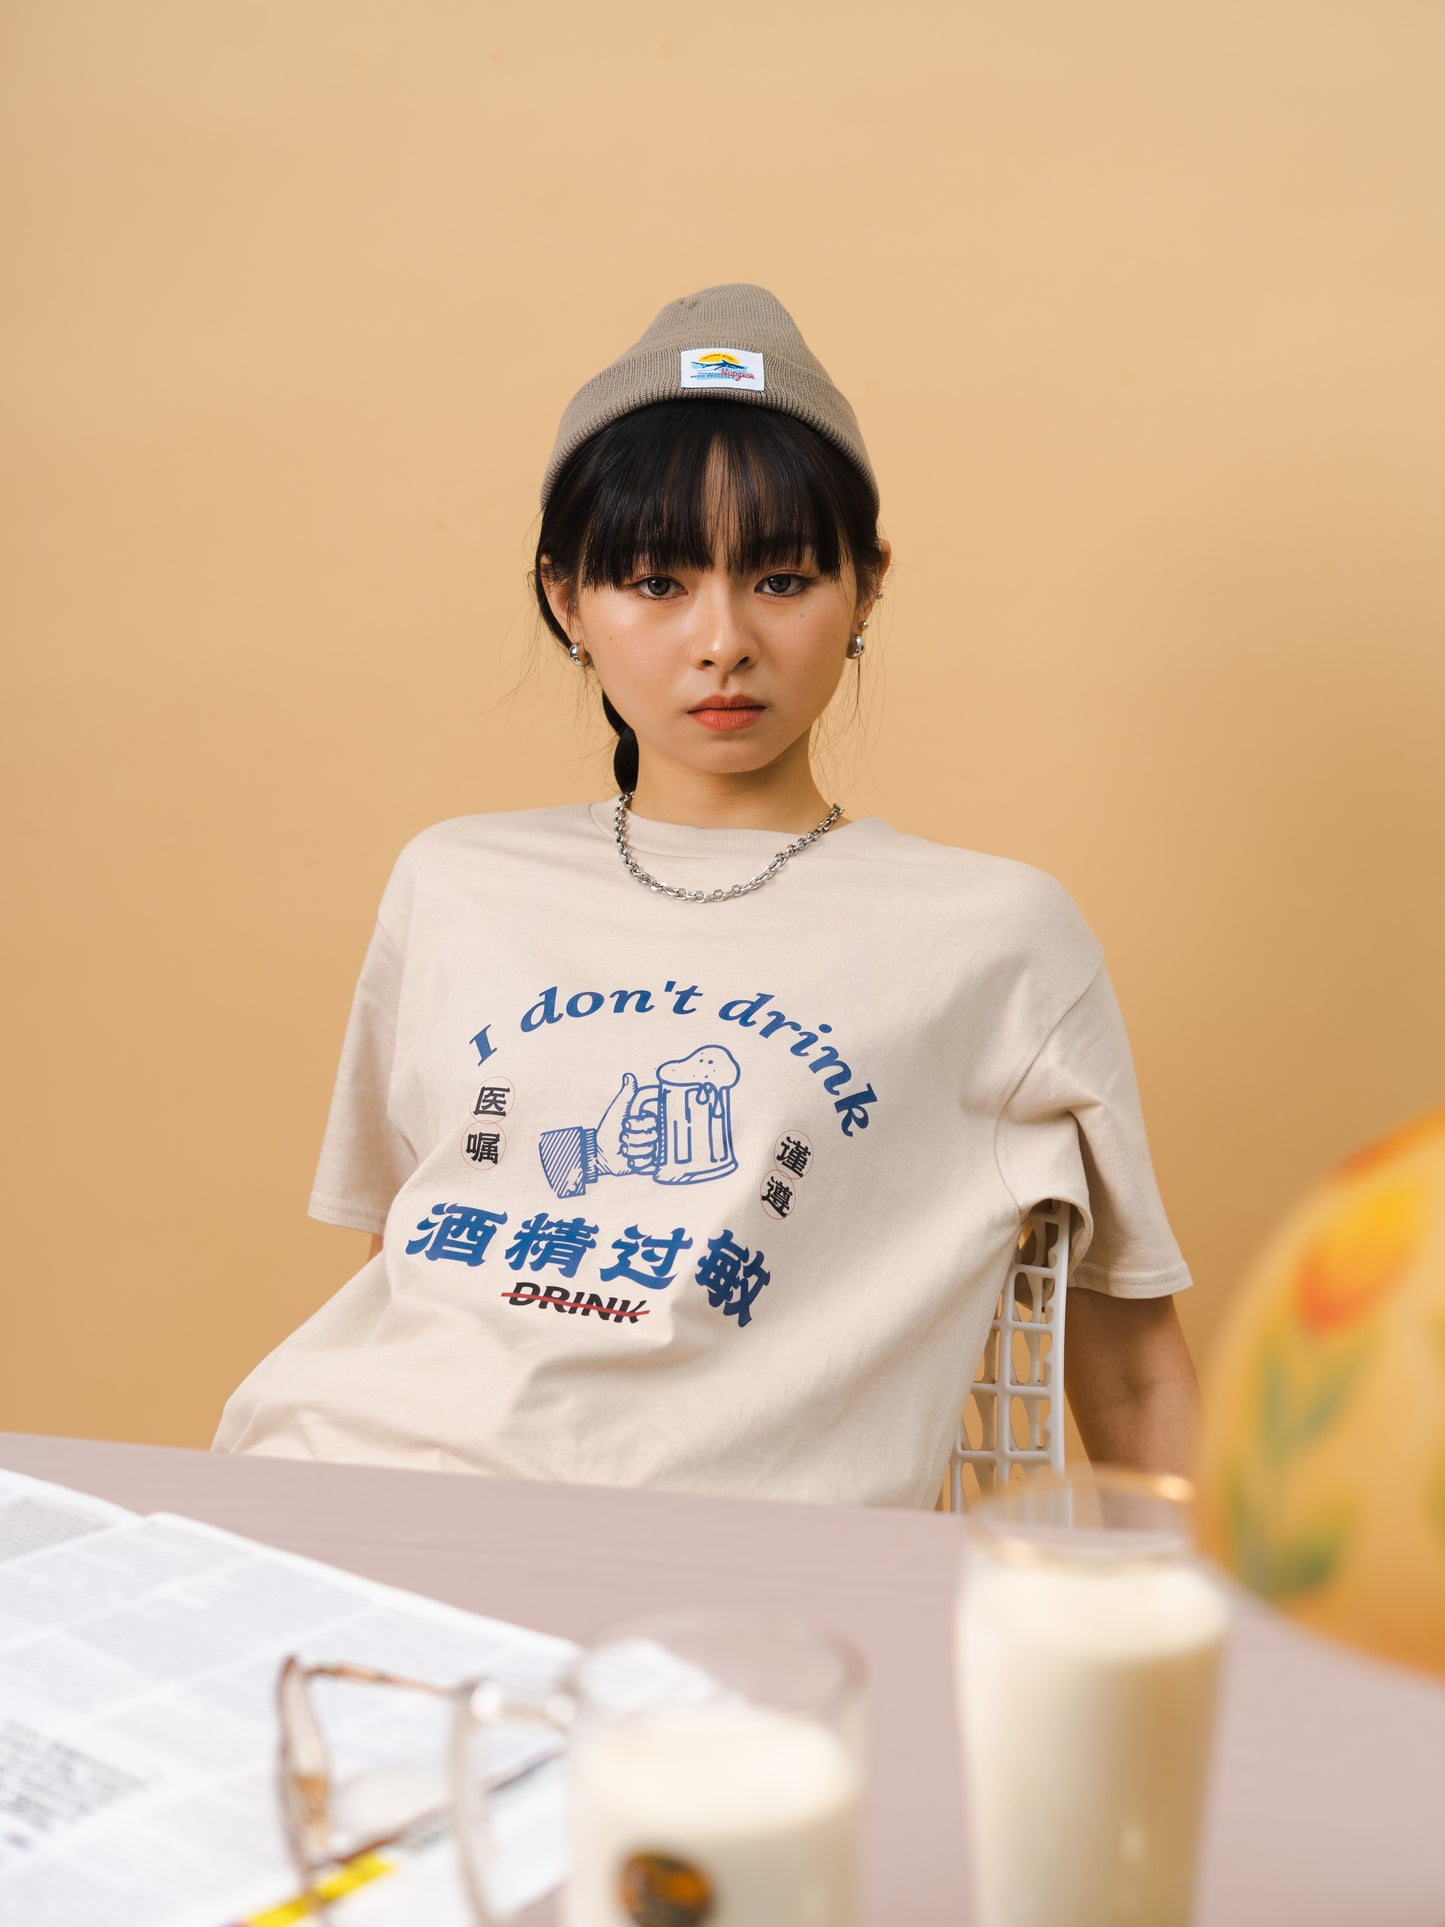 I DONT DRINK Cotton Tee (In-Stock)